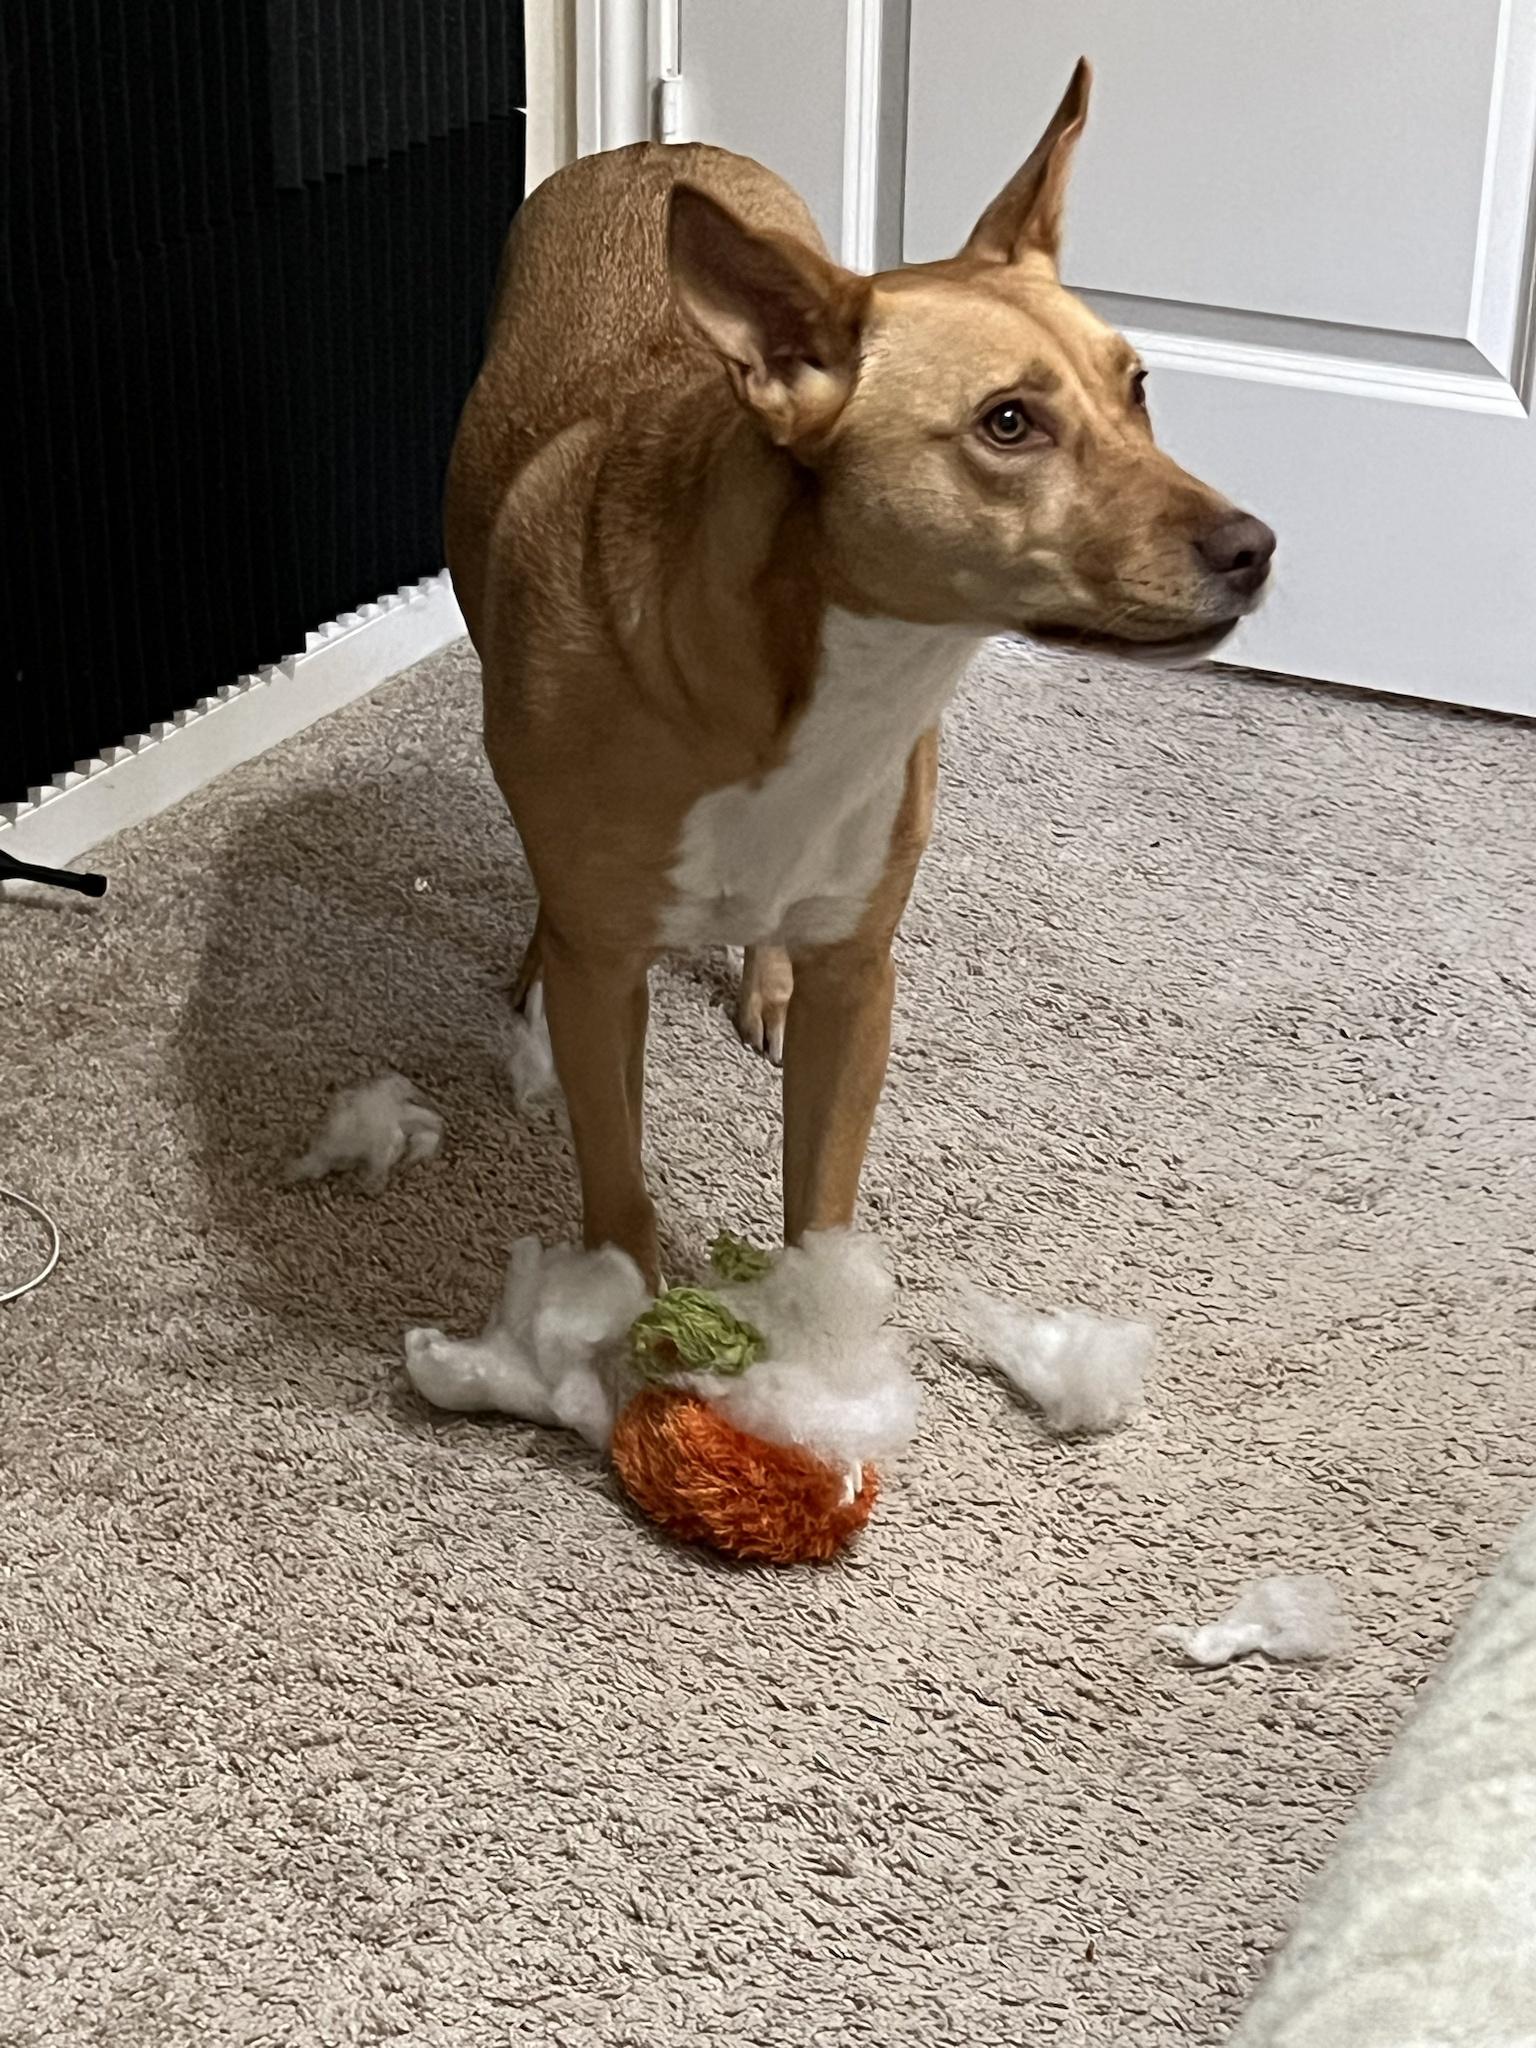 Victory Over The Carrot!